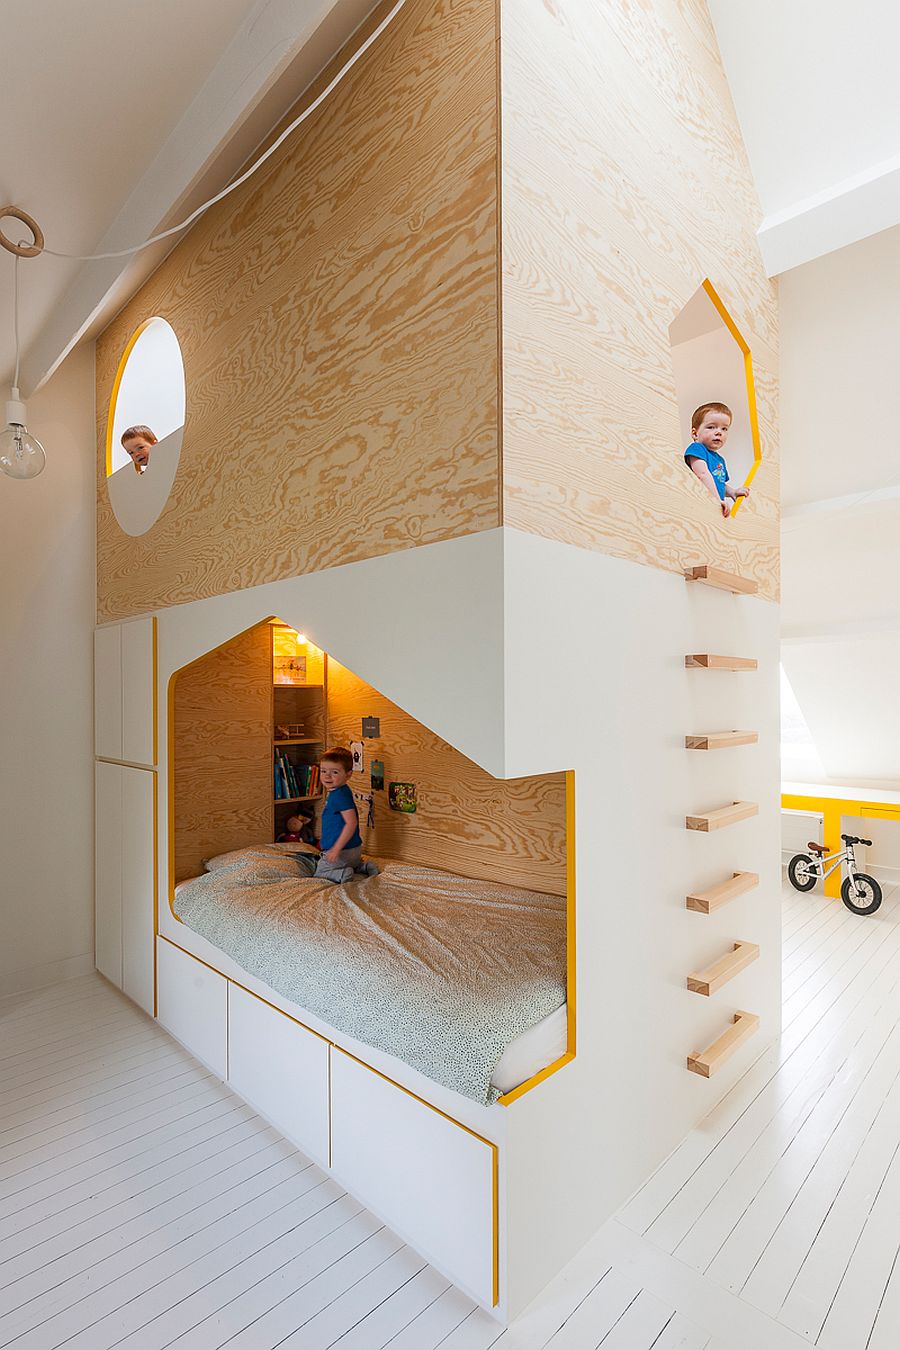 Bespoke kids&#039; bed design with twin beds and a loft playspace